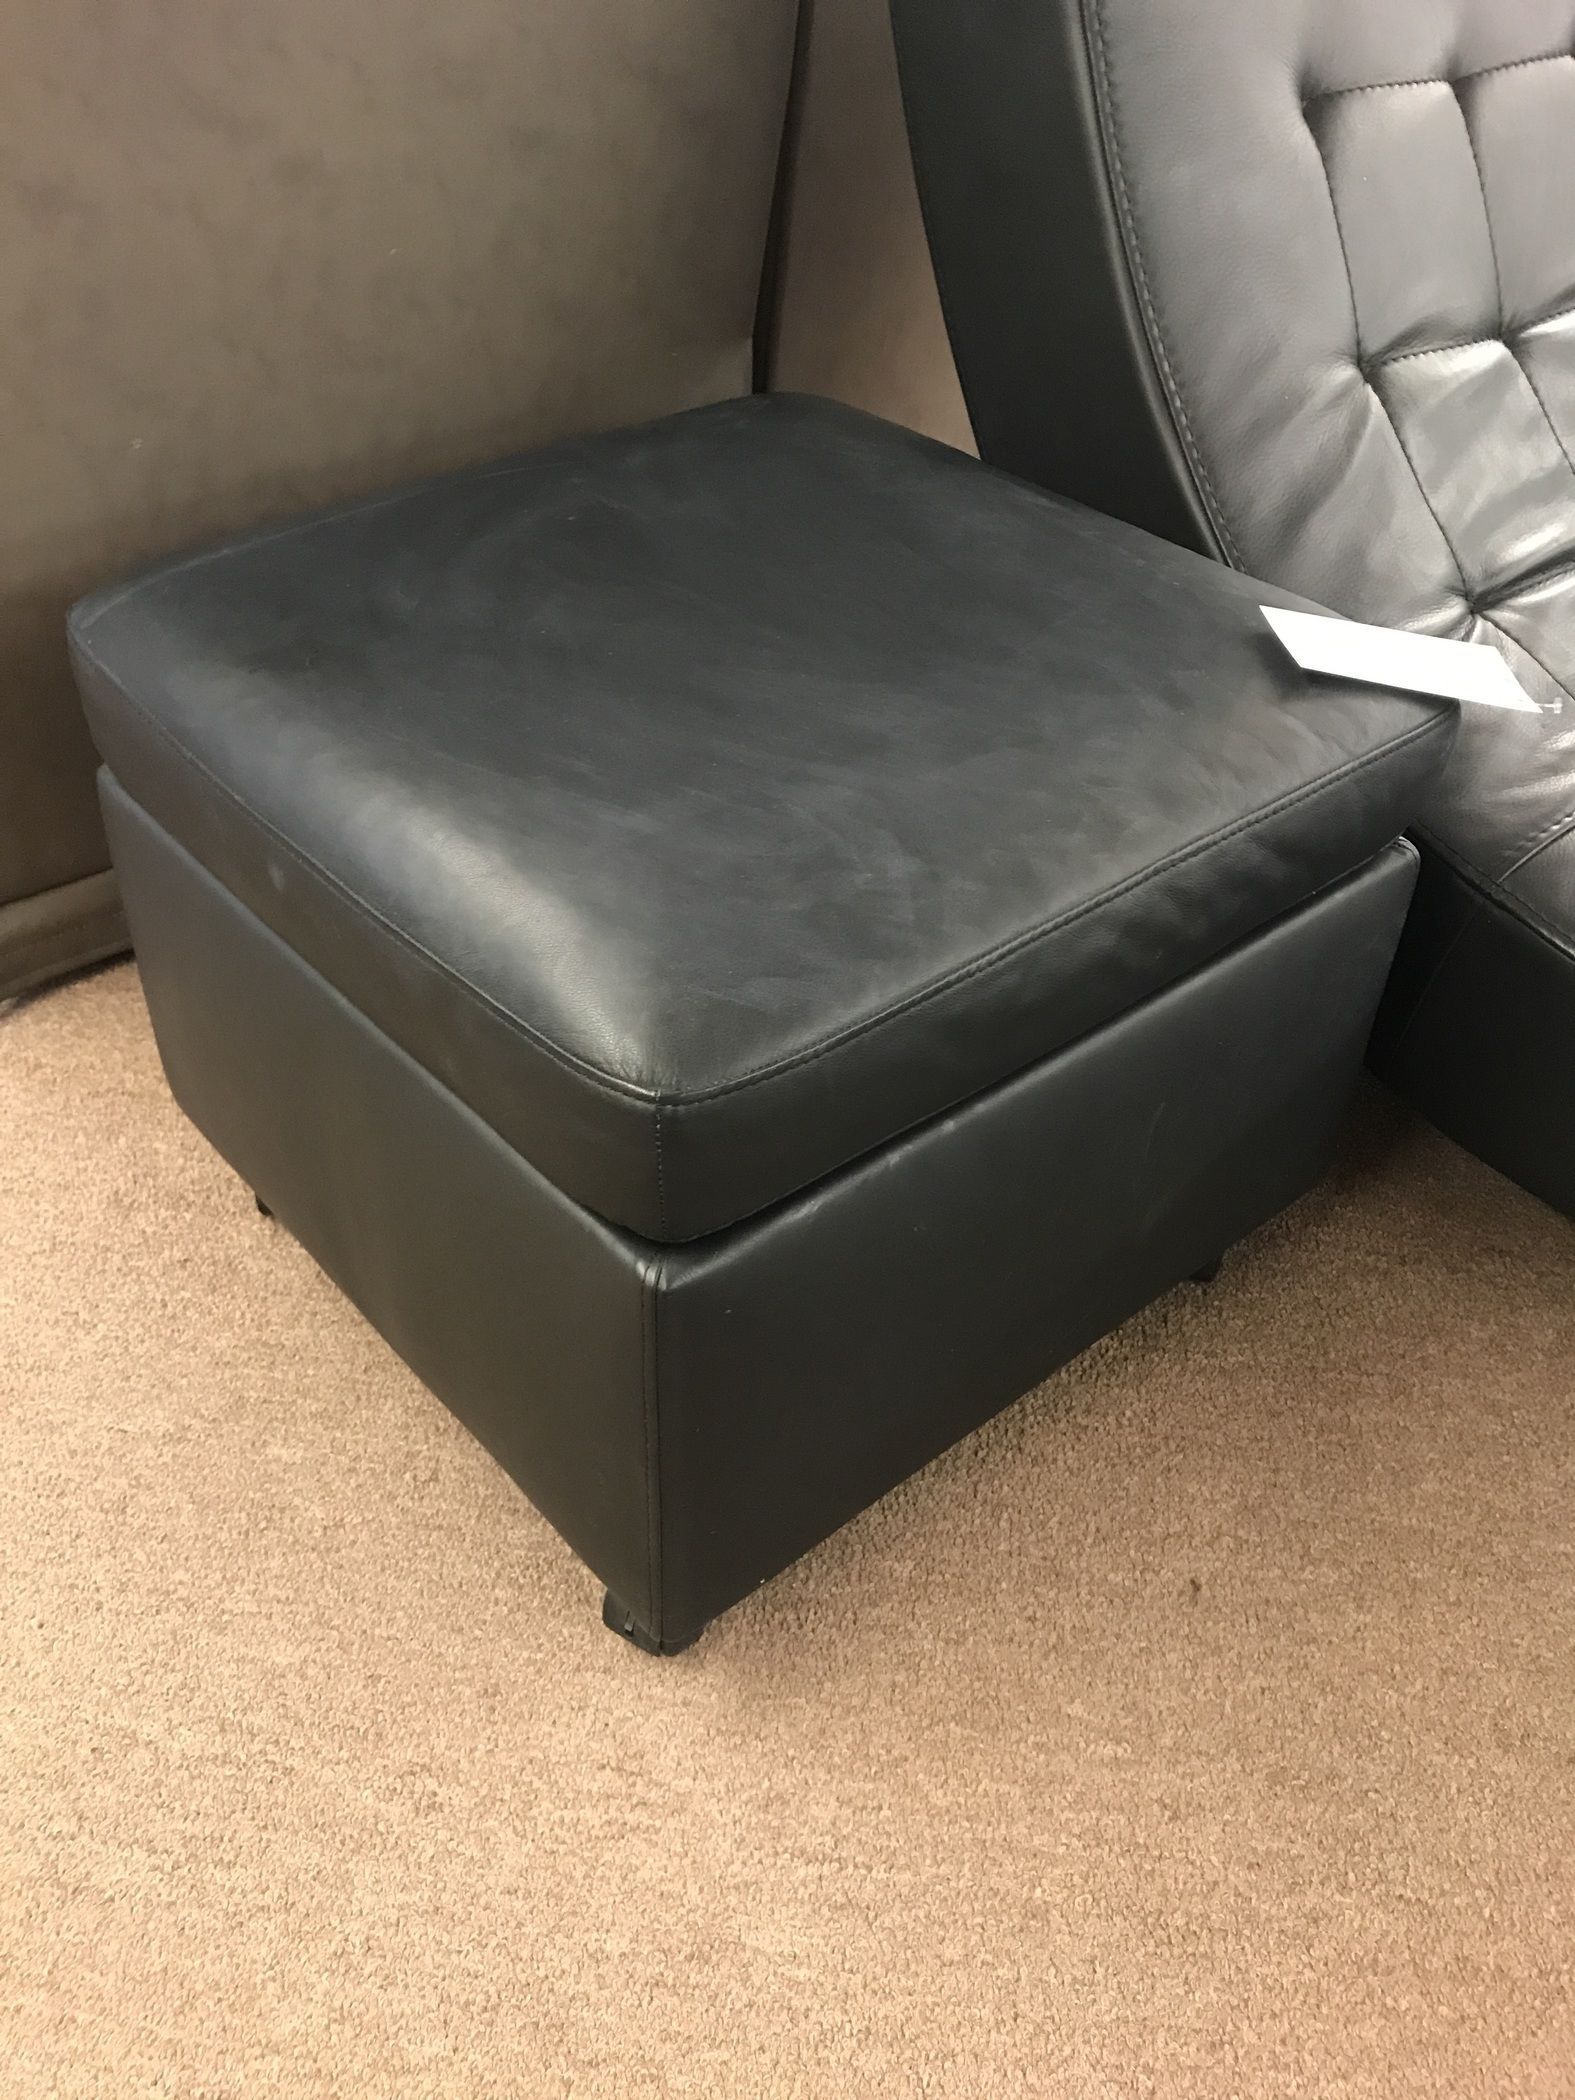 Black Leather Storage Ottoman | Delmarva Furniture Consignment With Regard To Black Leather And Gray Canvas Pouf Ottomans (View 2 of 20)